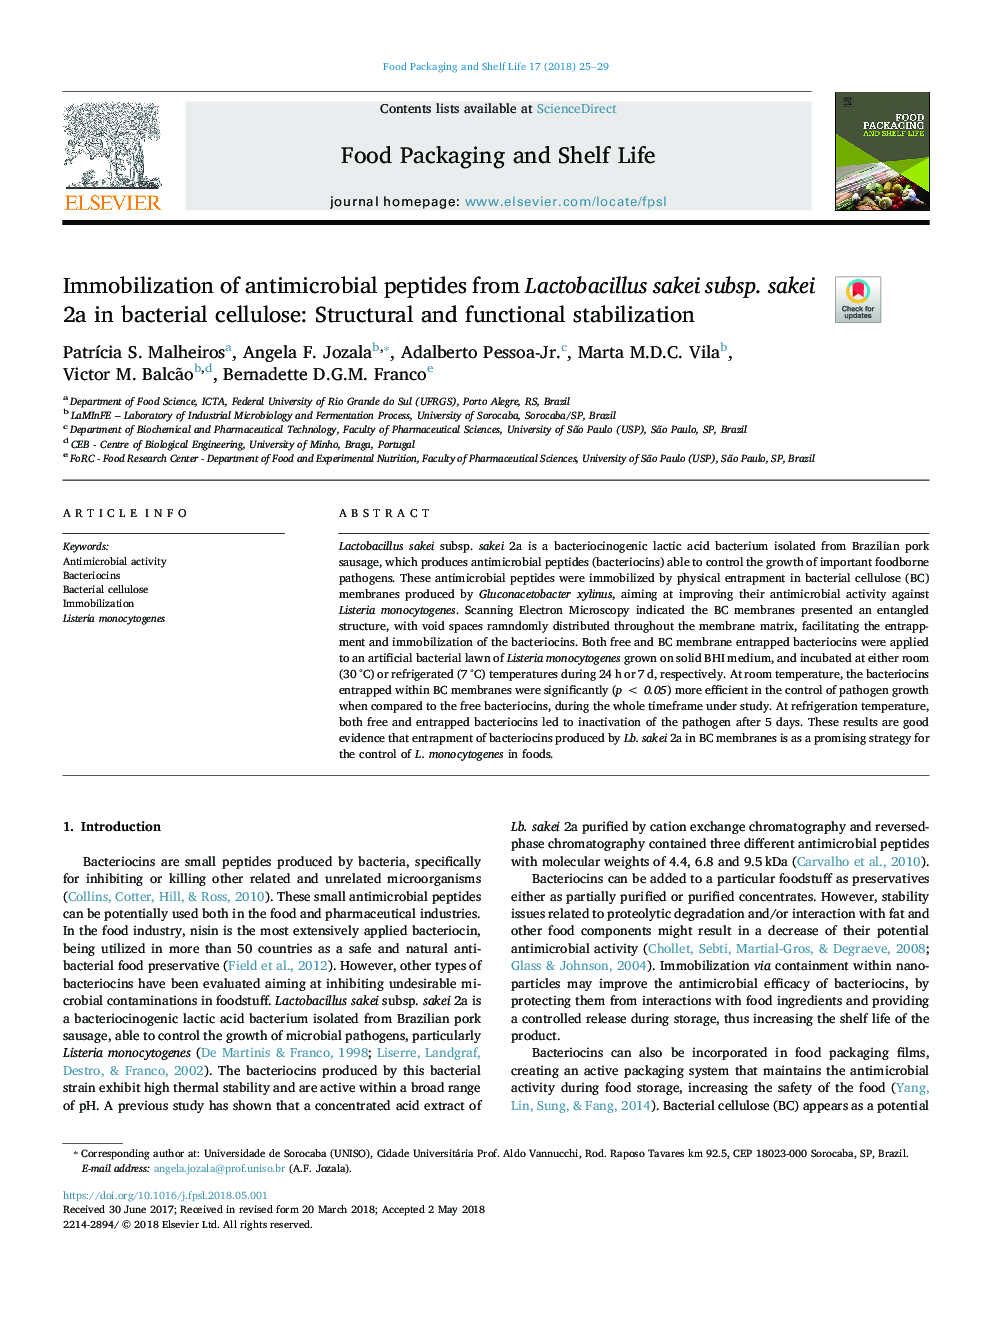 Immobilization of antimicrobial peptides from Lactobacillus sakei subsp. sakei 2a in bacterial cellulose: Structural and functional stabilization